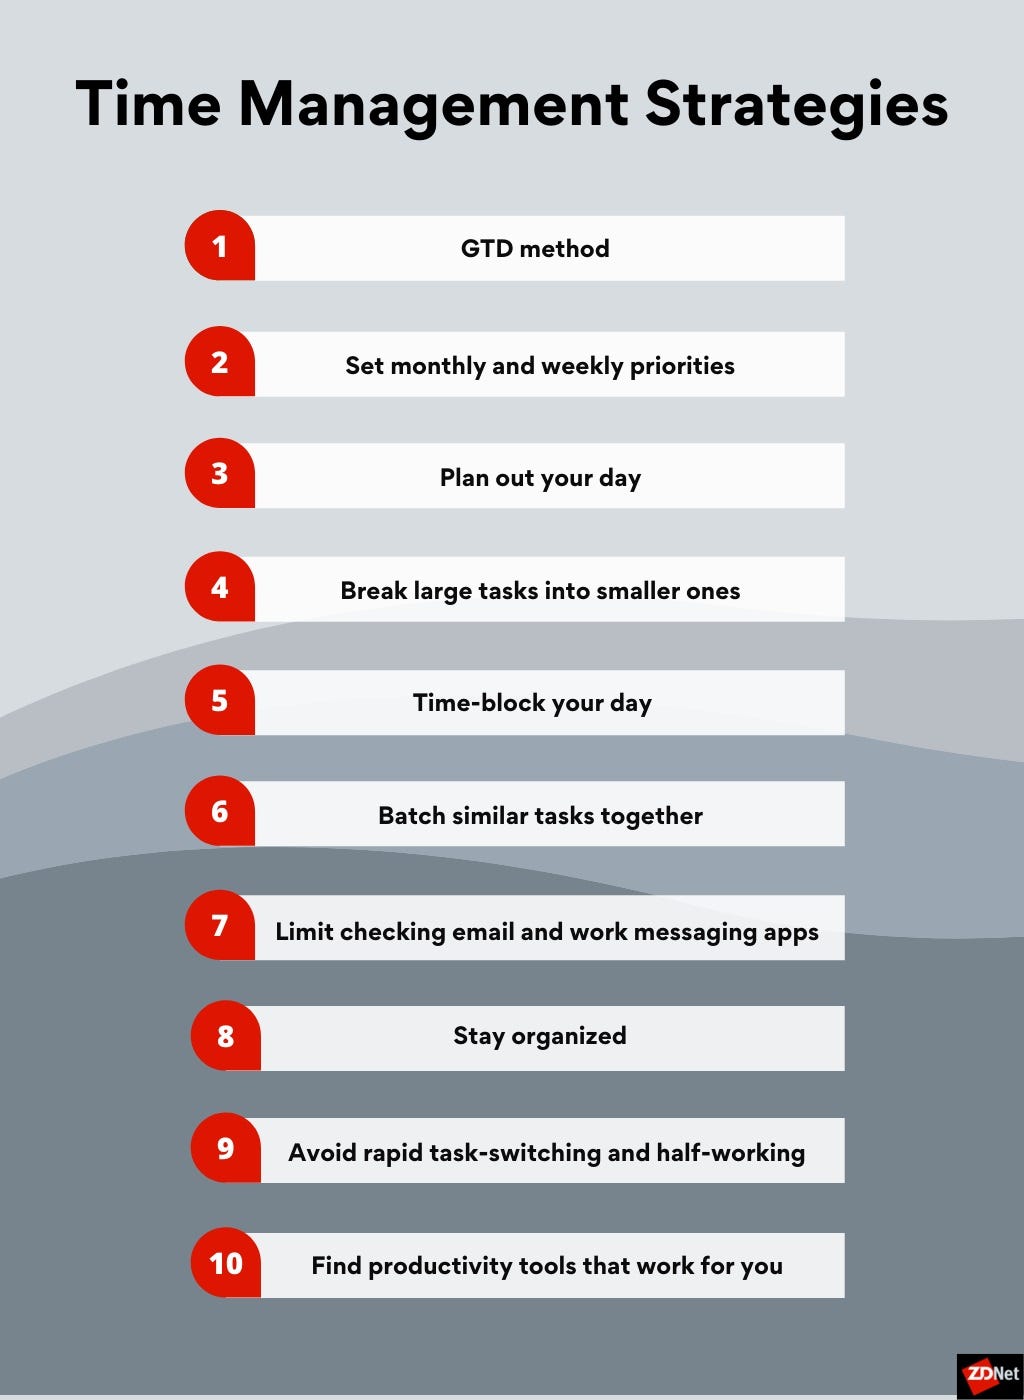 List of time management strategies: GTD method, set monthly and weekly priorities, plan out your day, break large tasks into smaller ones, time-block your day, batch similar tasks together, limit checking email and work messaging apps, stay organized, avoid rapid task-switching and half-working, find productivity tools that work for you